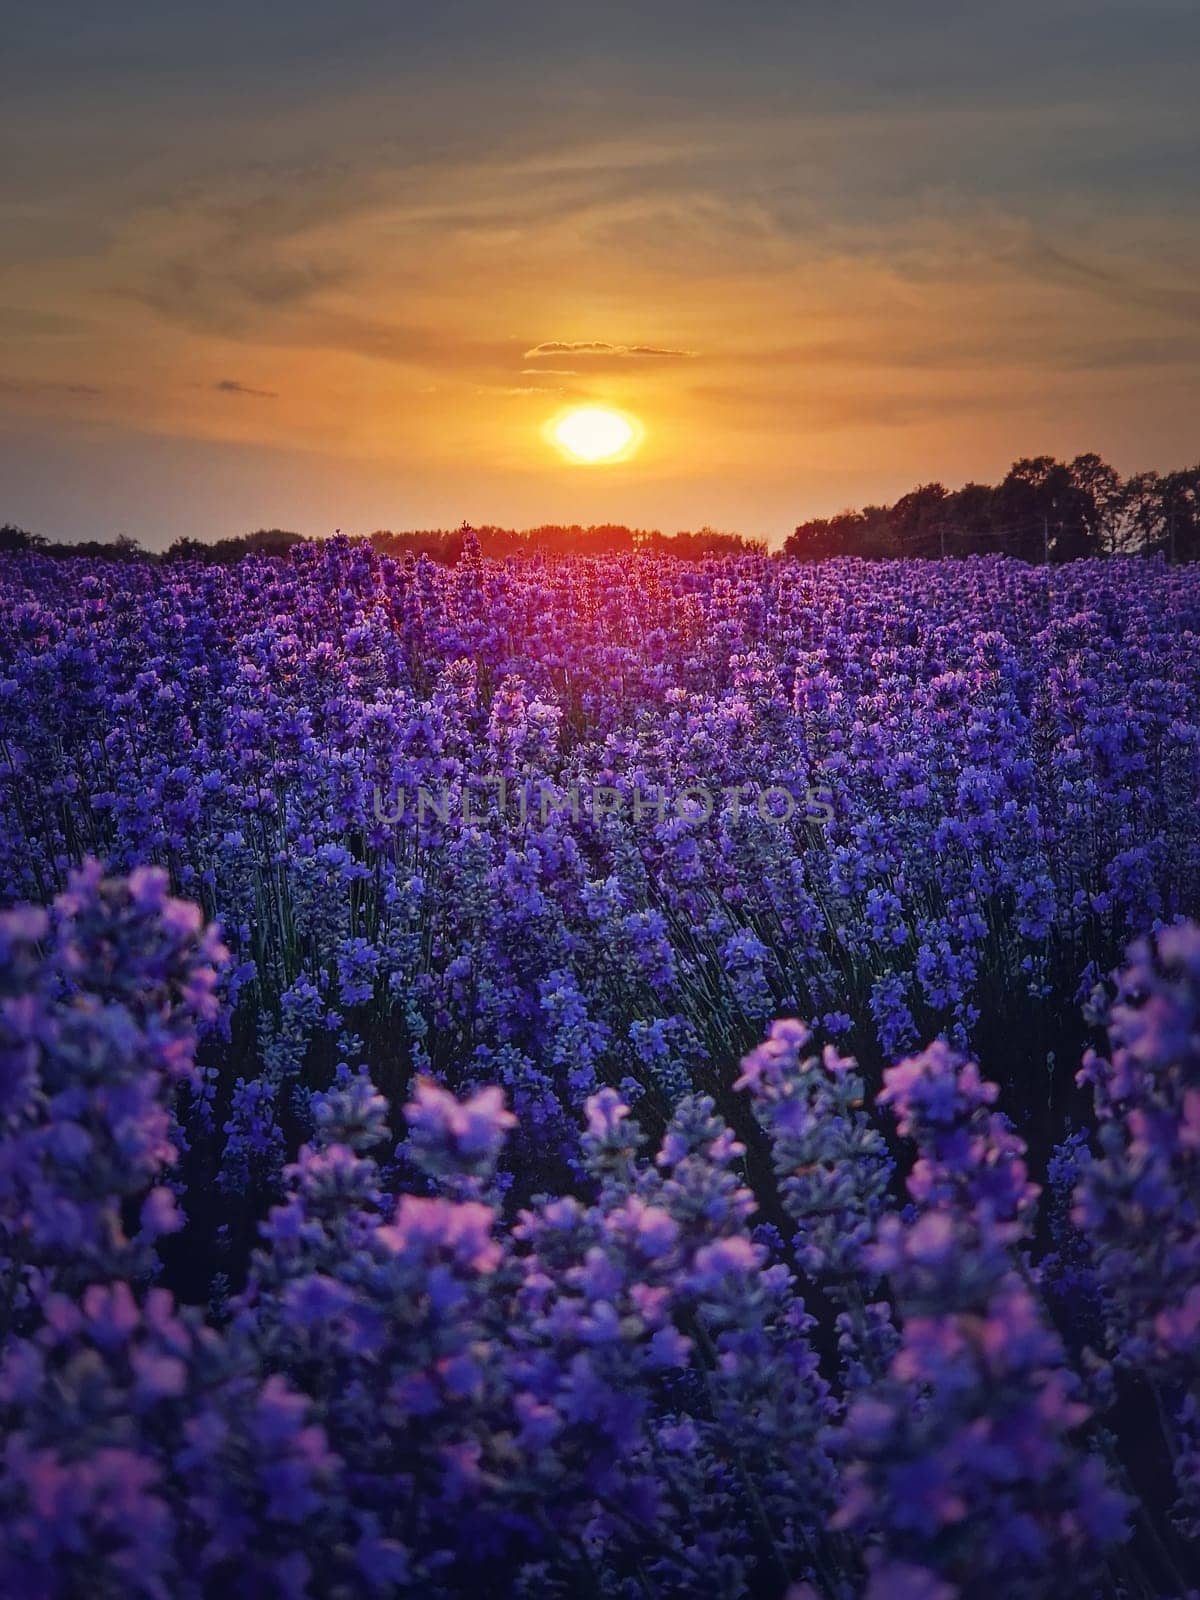 Picturesque scene of blooming lavender field. Beautiful purple pink flowers in warm summer light. Fragrant lavandula plants blossoms in the meadow
